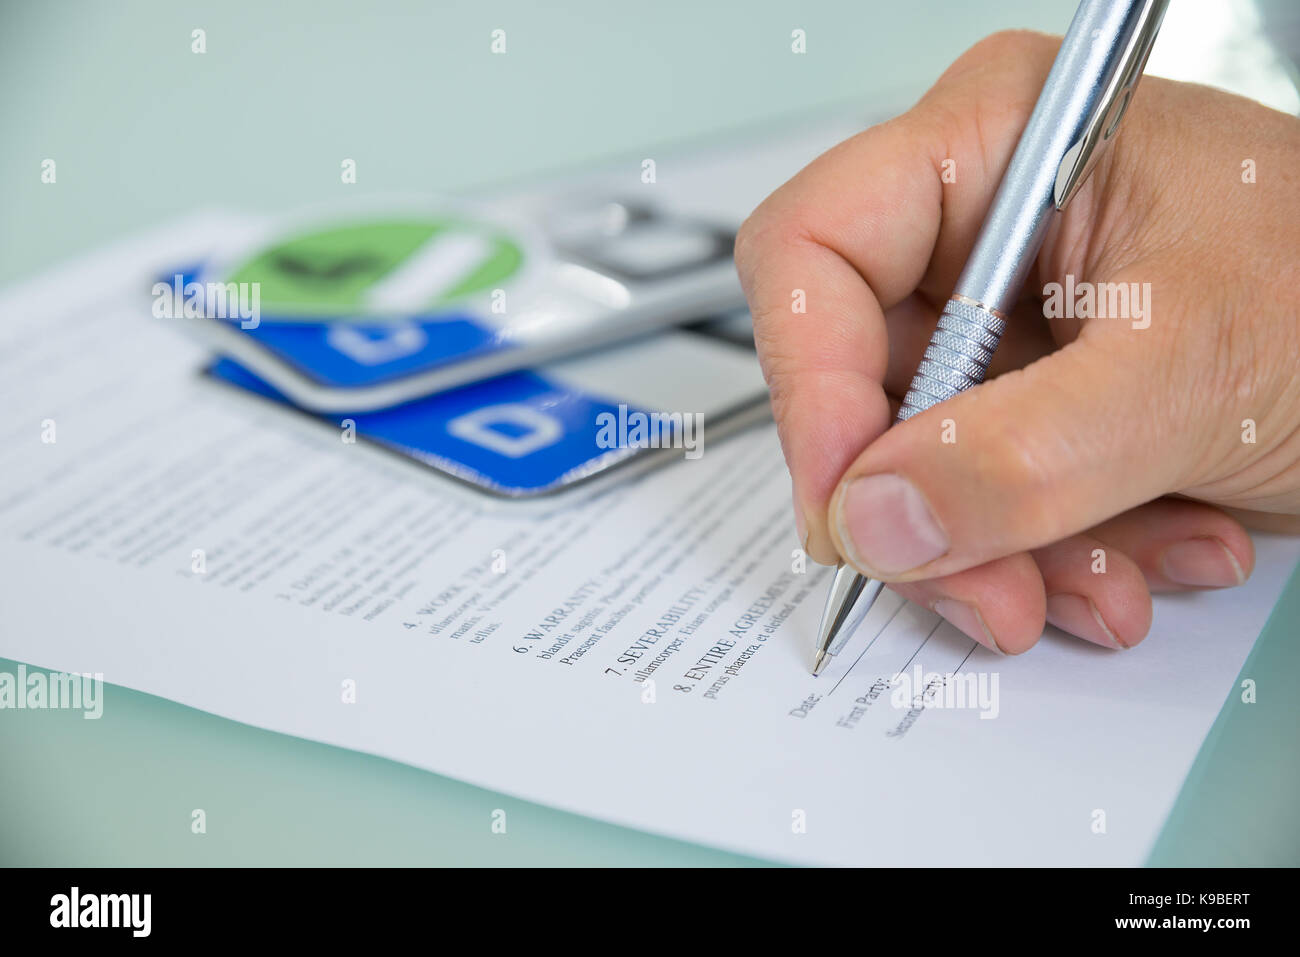 Close-up Of A Hand Filling Car Sale Contract Form With Vehicle Registration Plate On Desk. Contract Paper Contains Placeholder Text Stock Photo